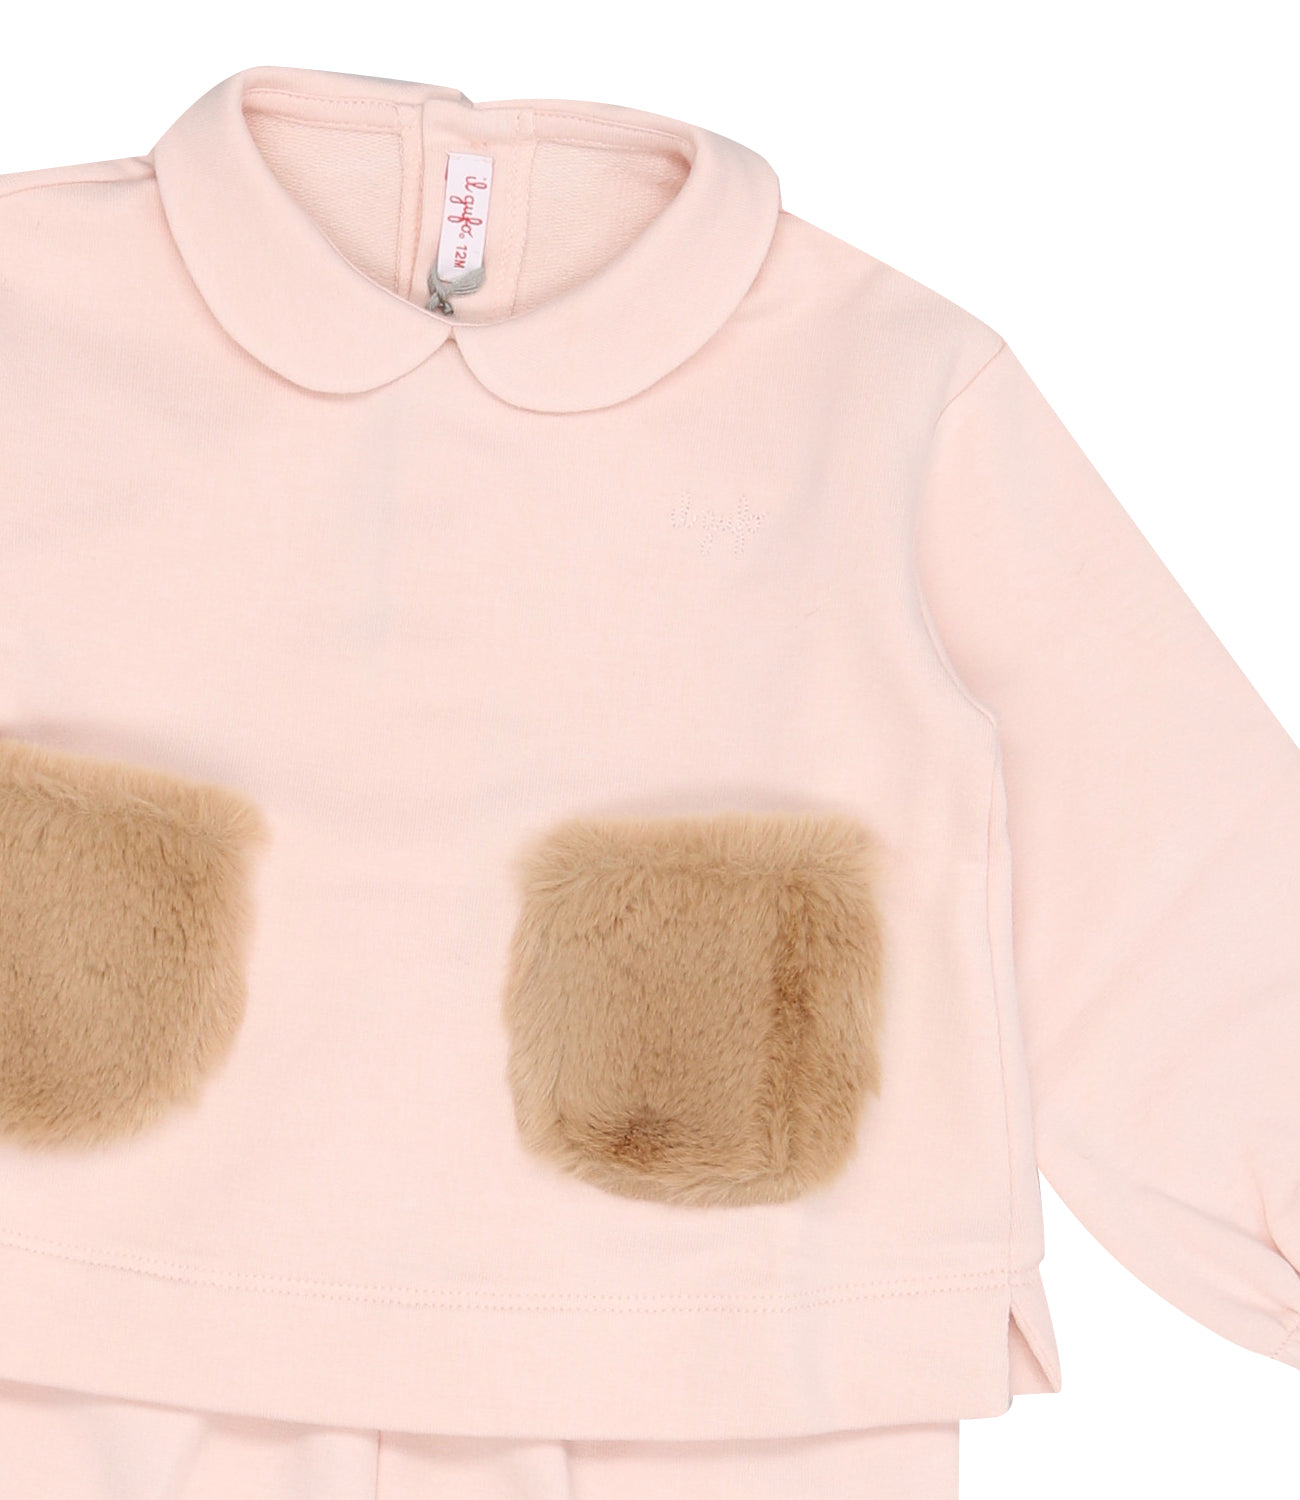 The Owl | Pink Sweater and Pant Set